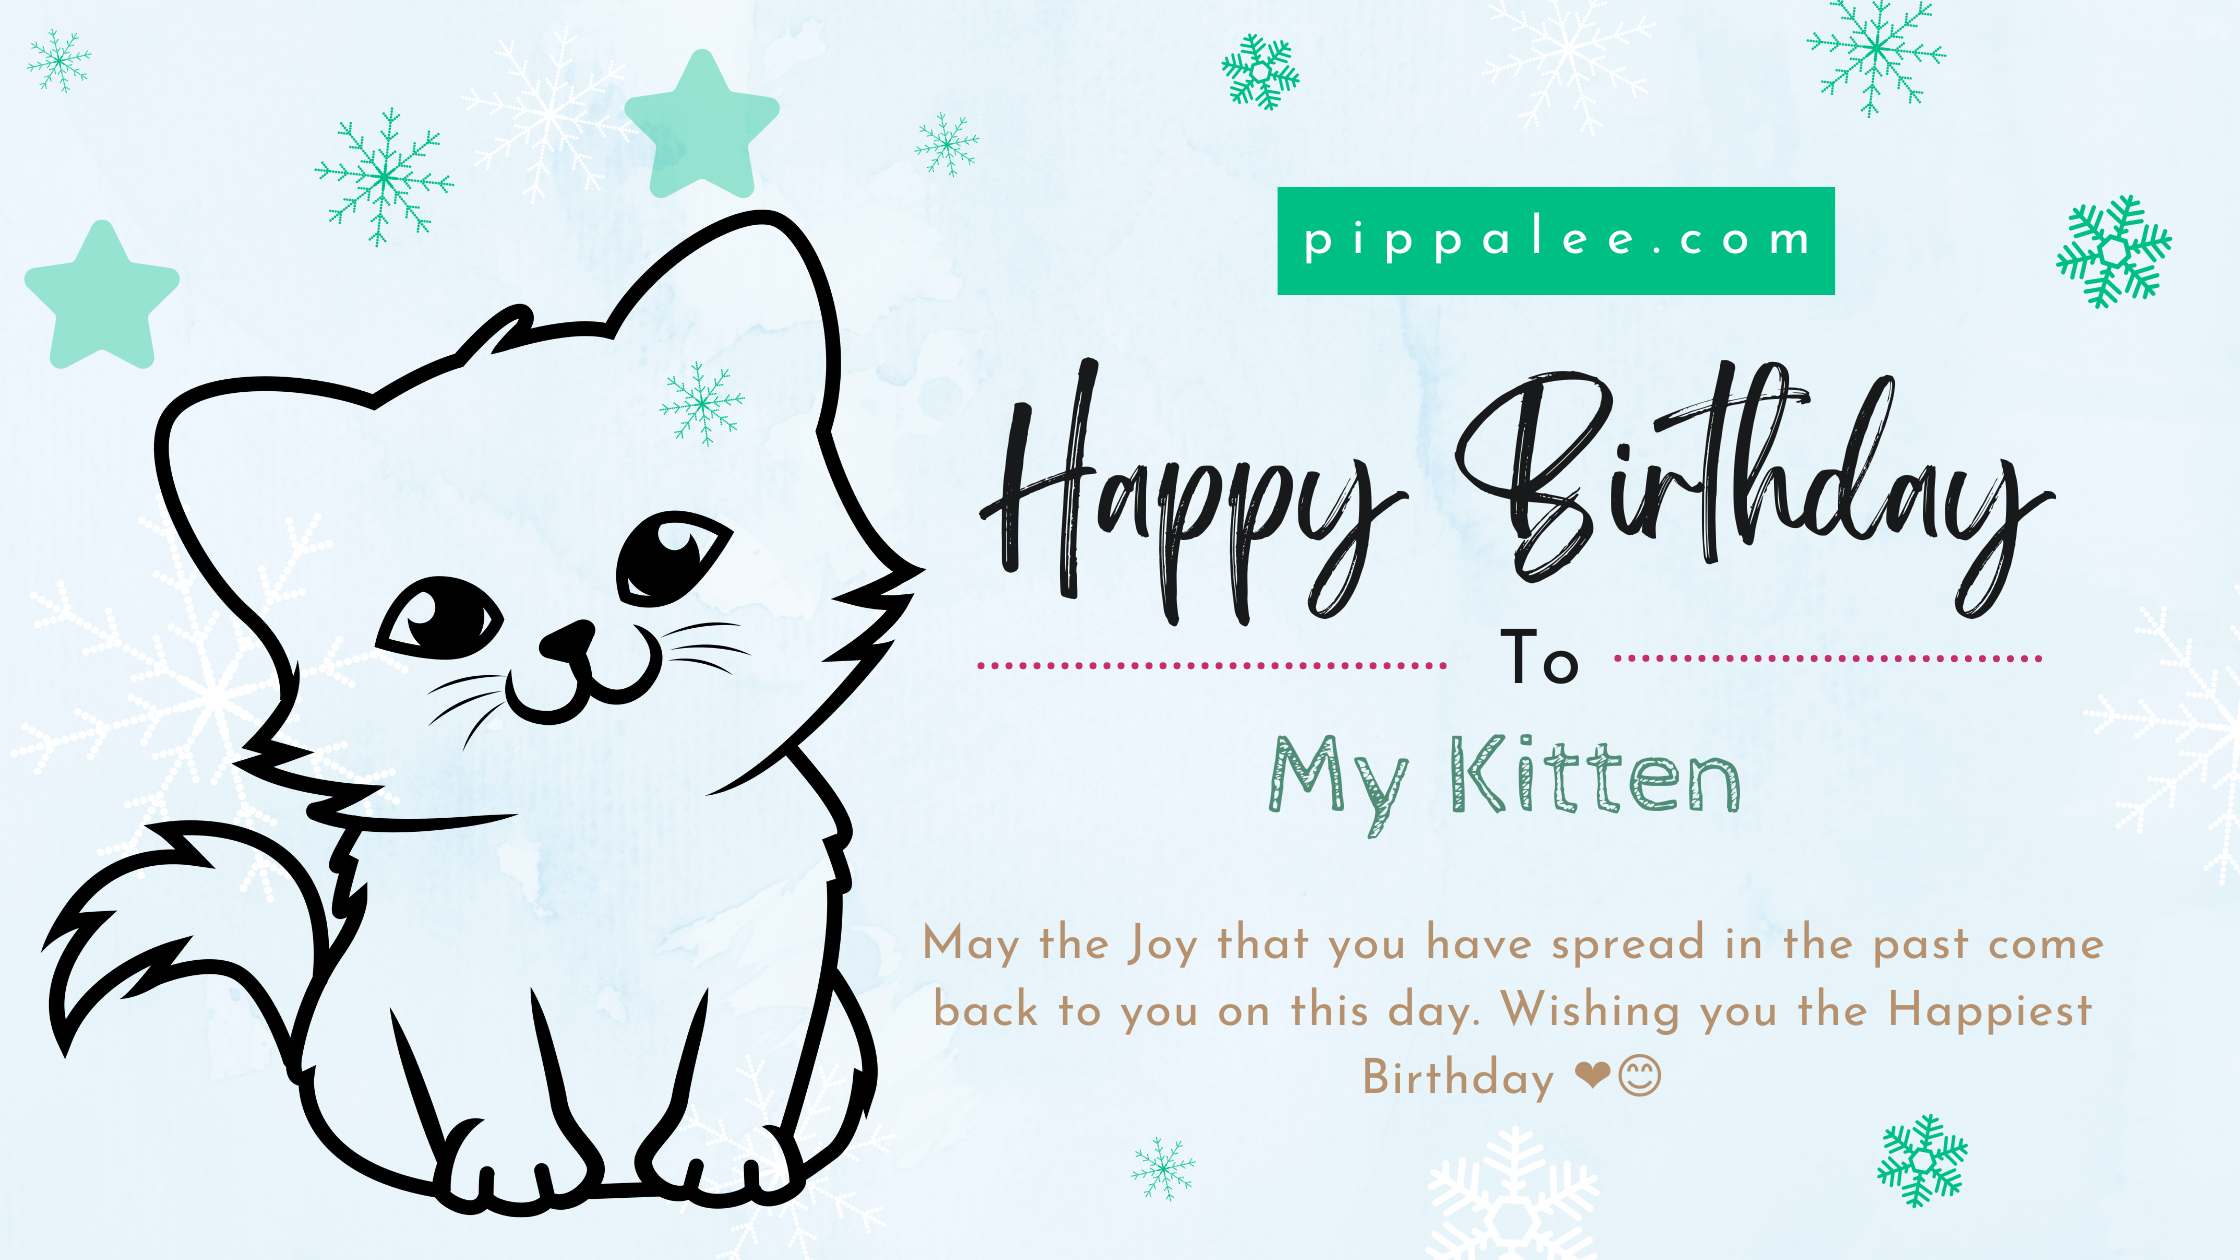 Happy Birthday To My Kitten - Wishes & Messages